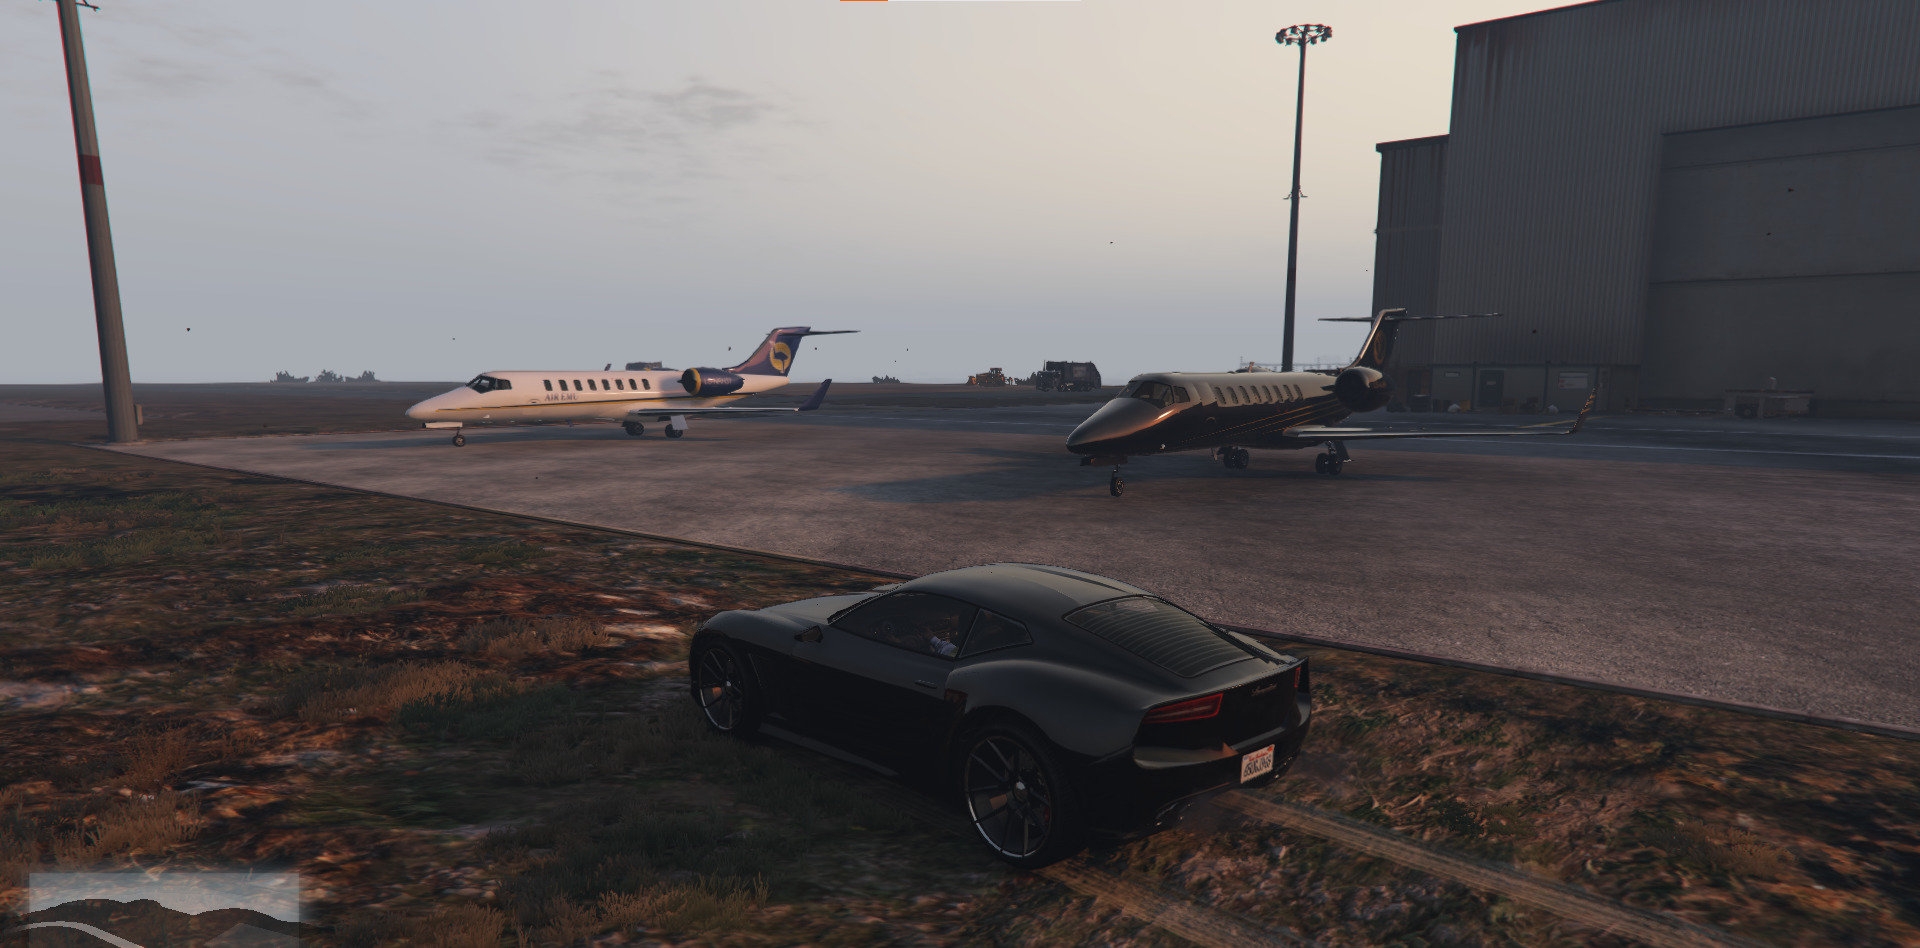 A screenshot of a car in front of several private jets in GTA 5